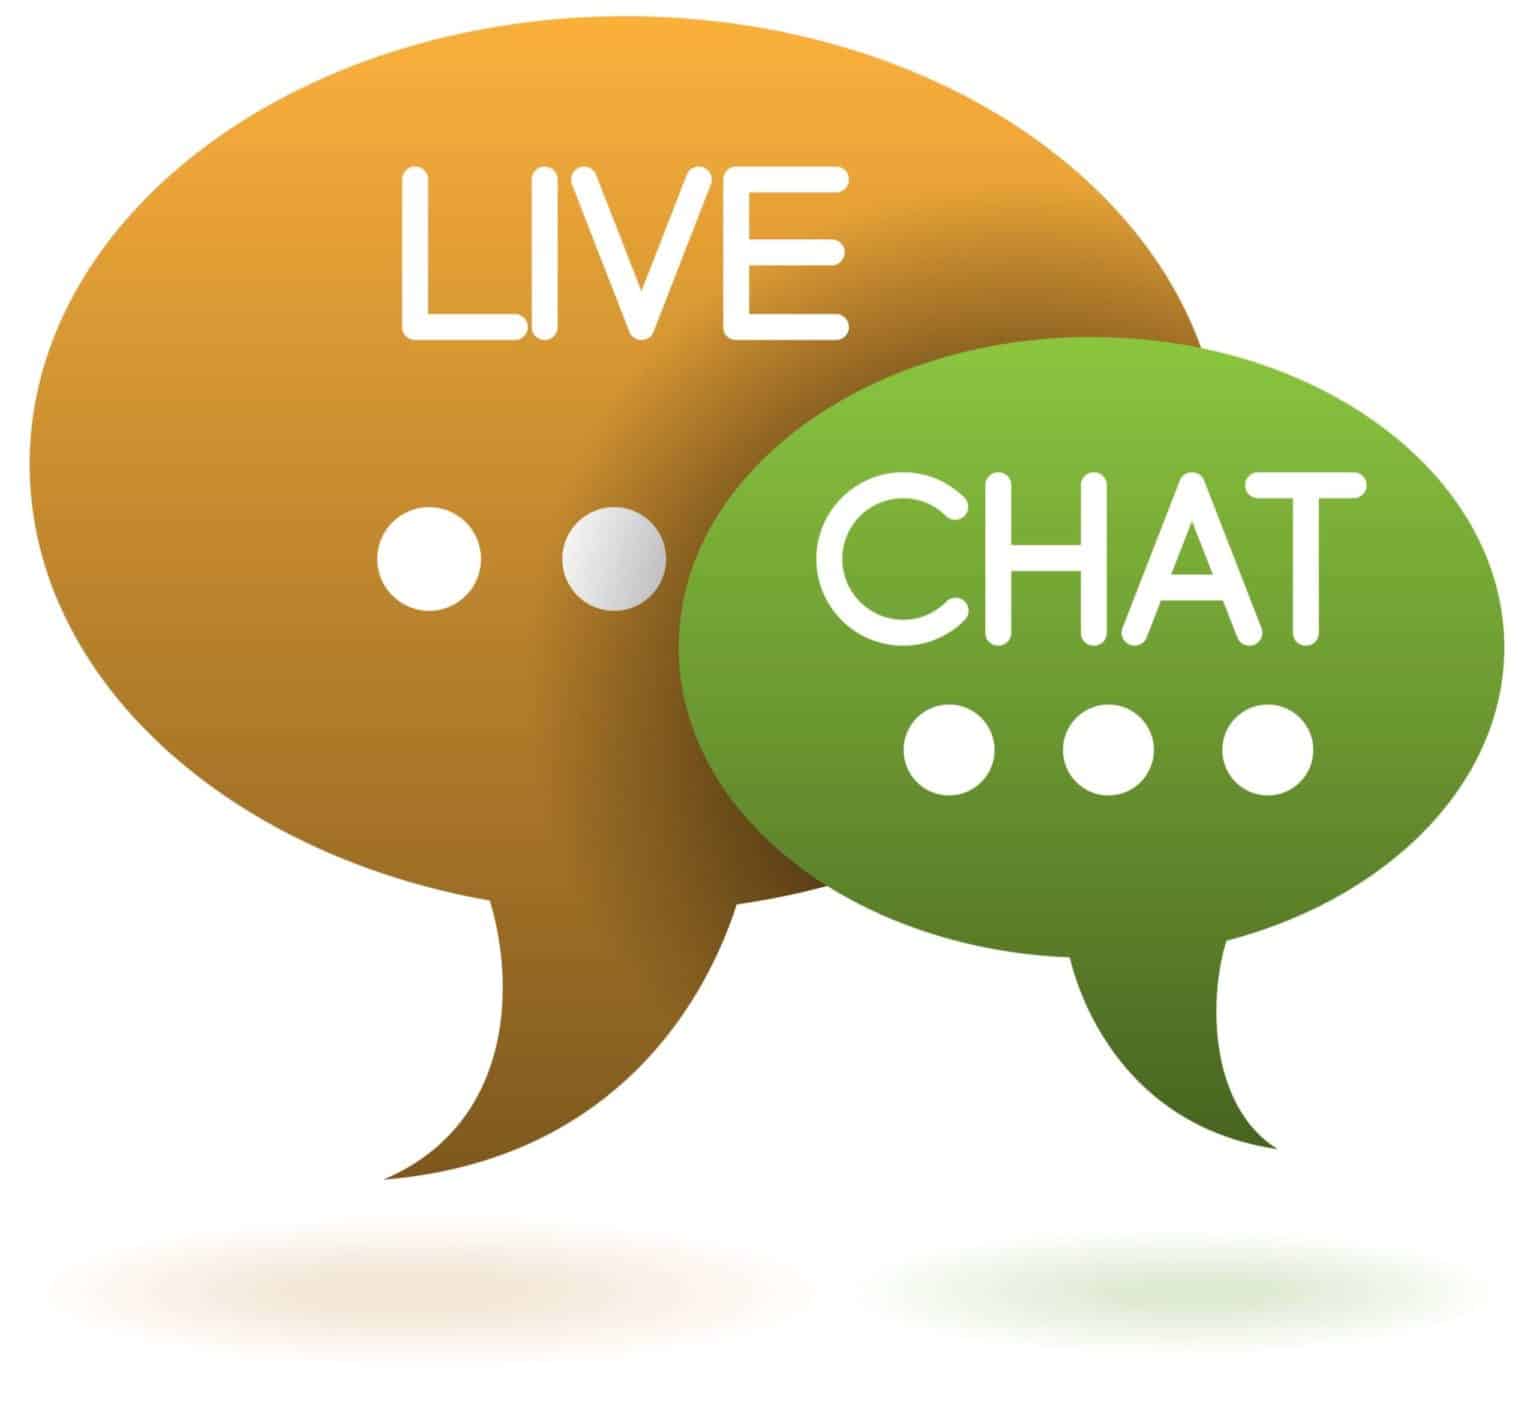 Should Live Chat Be Available on My Website?